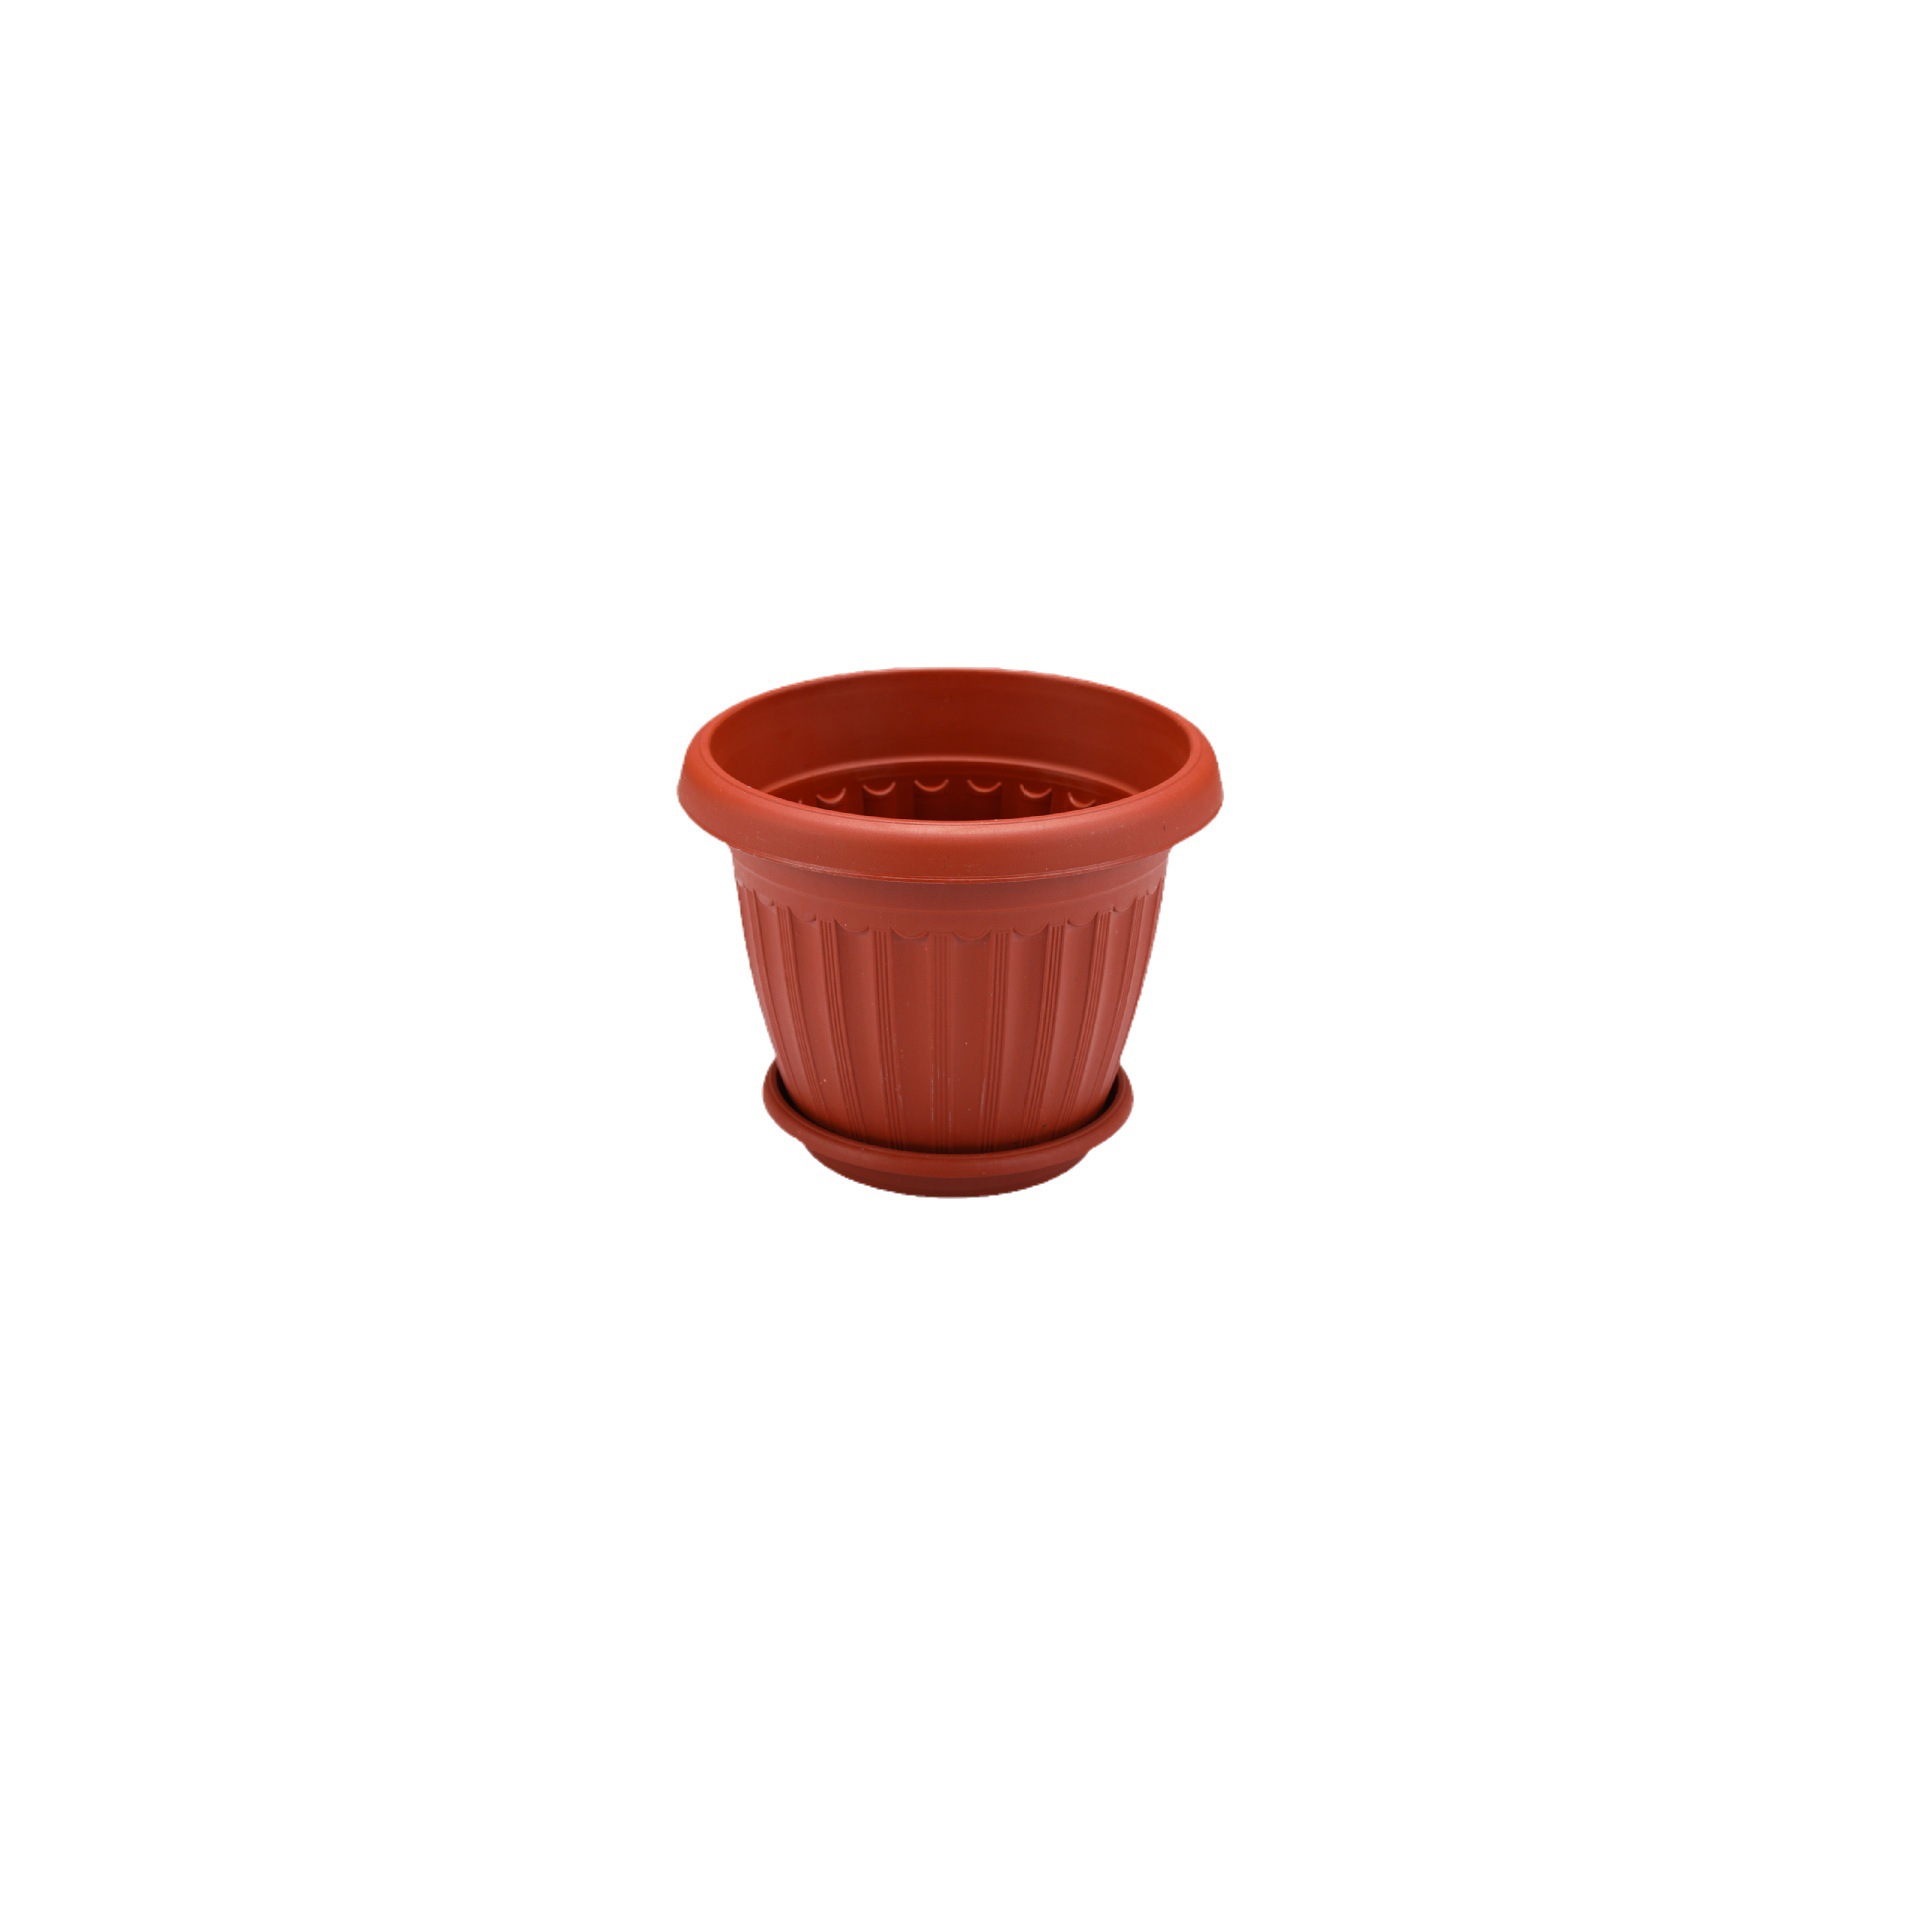 Factory Wholesale Seedling Two-Tone Pot Thick Resin Plastic Seedling Pot Brick Red Succulent Two-Color Gallon Basin